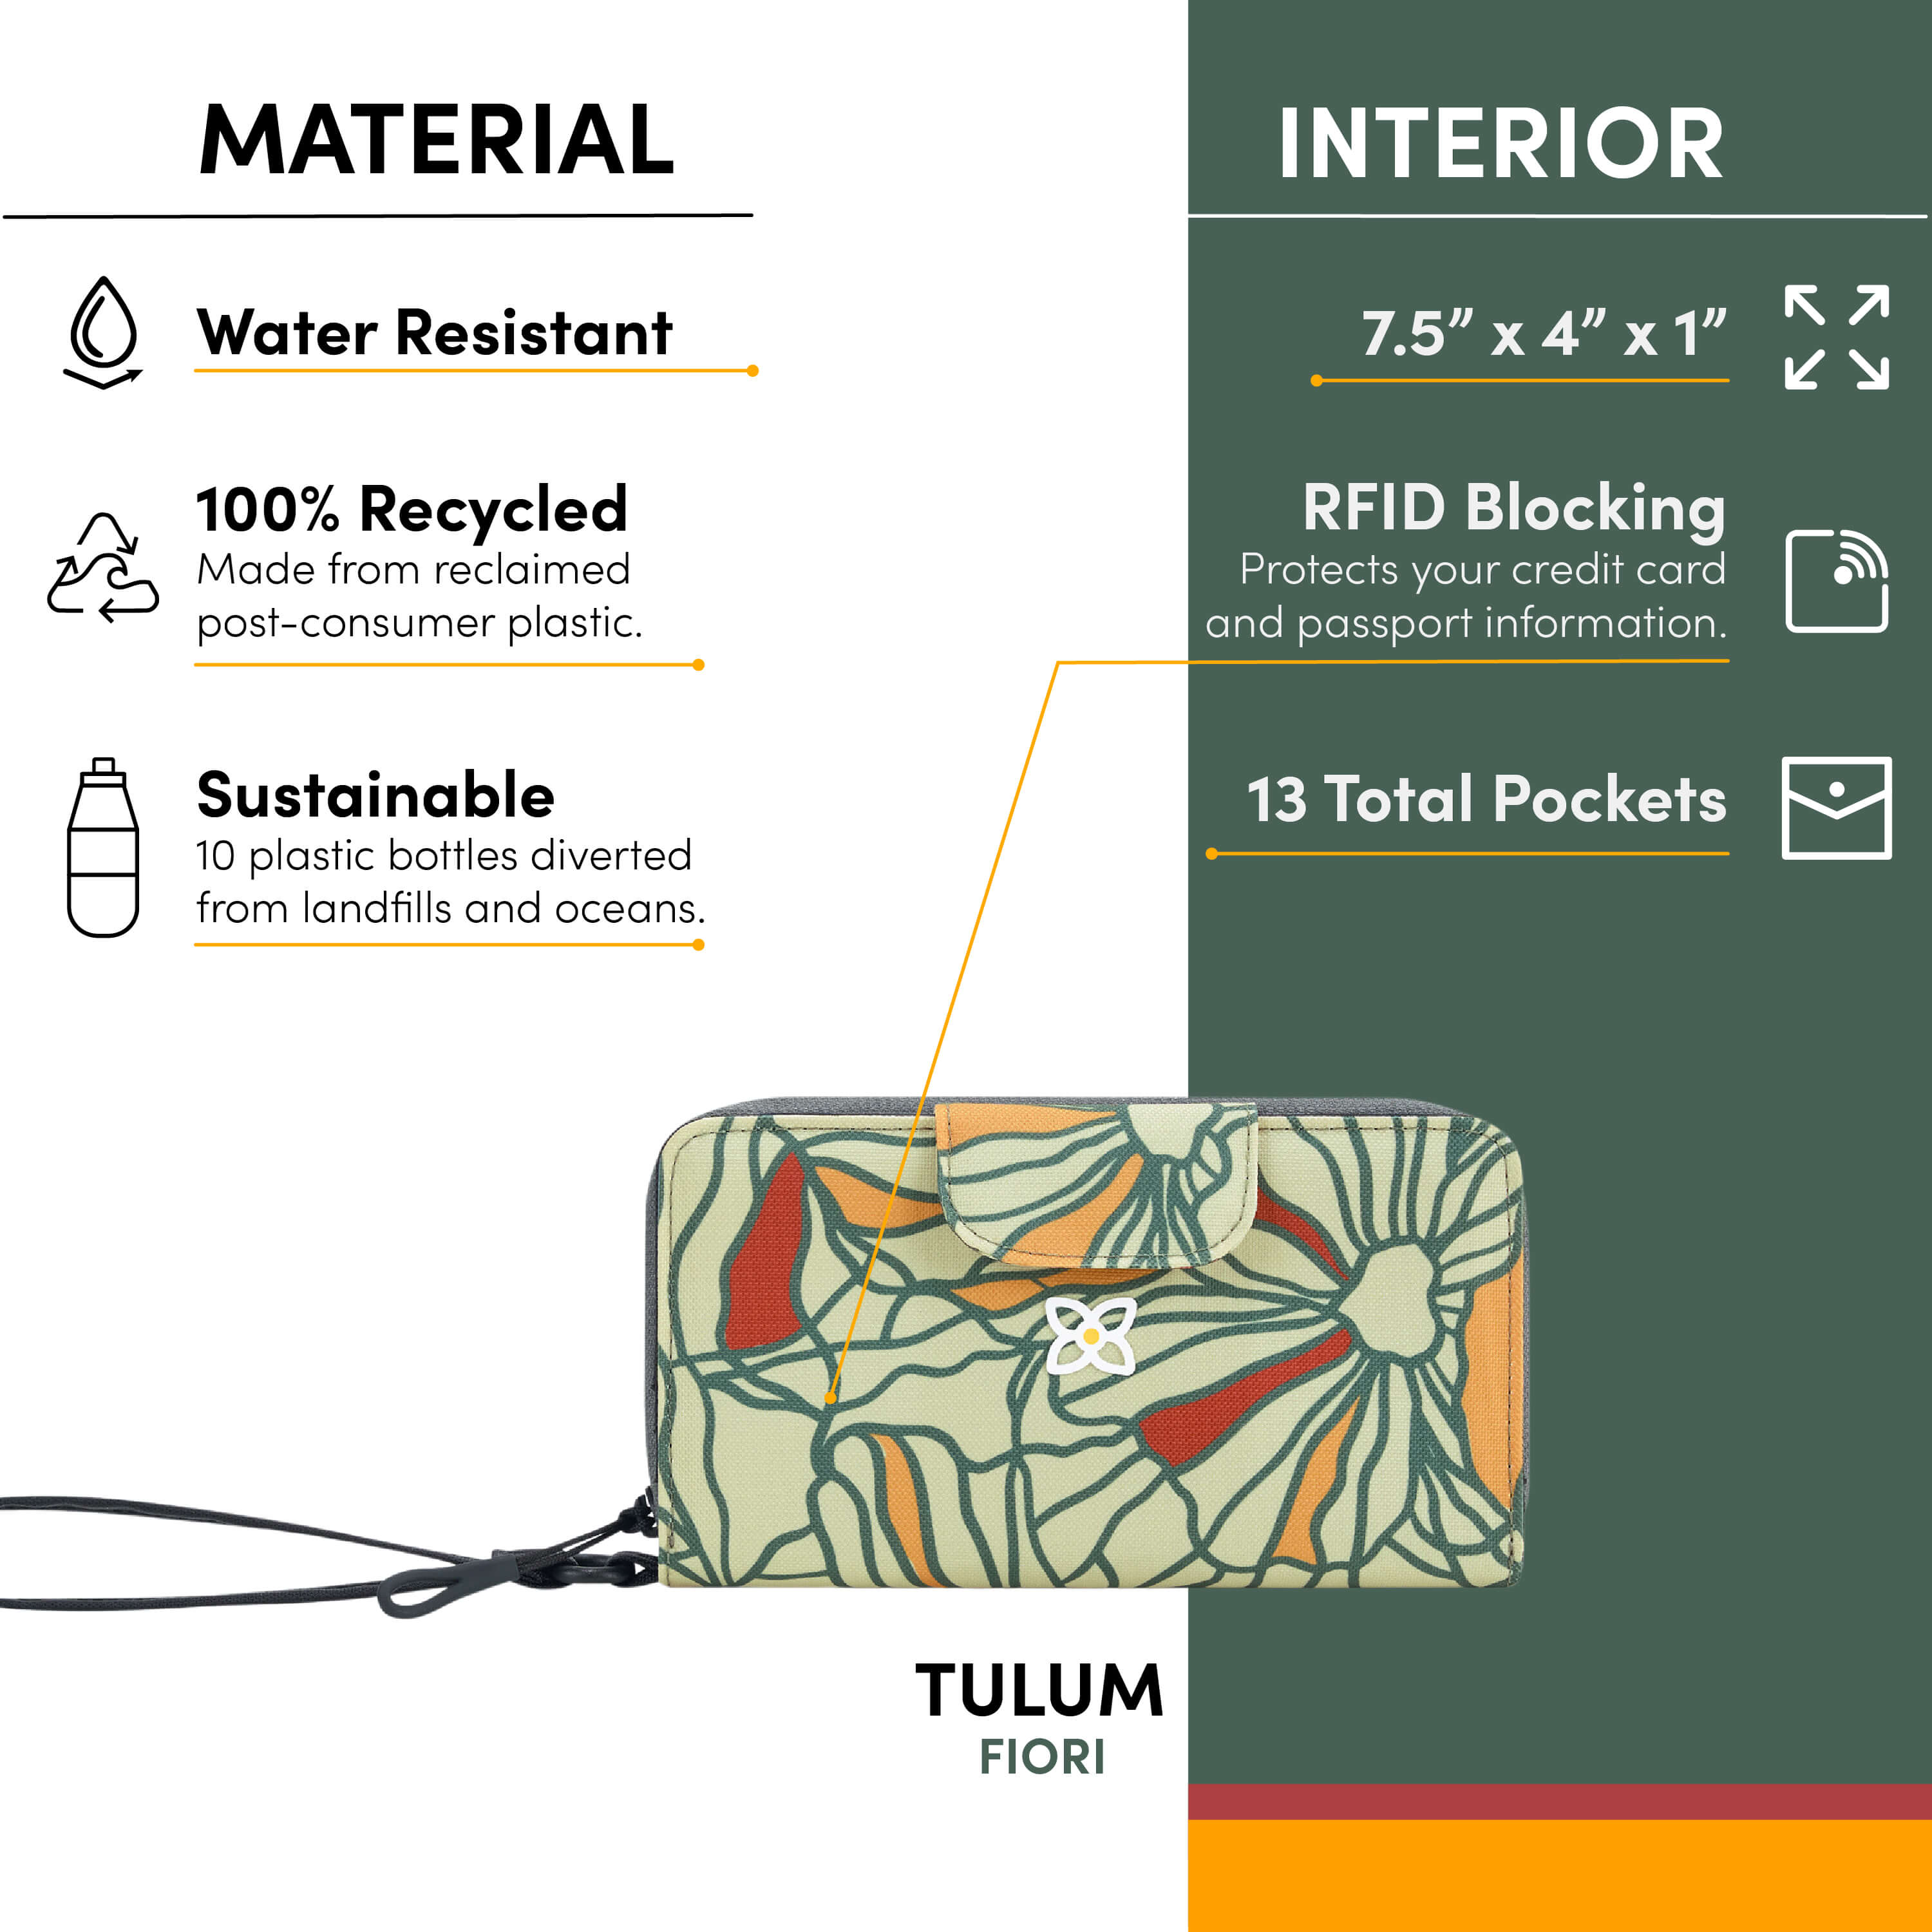 Graphic showing the special features of Sherpani RFID travel wallet, the Tulum: water-resistant wallet, sustainably made from recycled materials, RFID blocking, 13 total pockets for organization. 